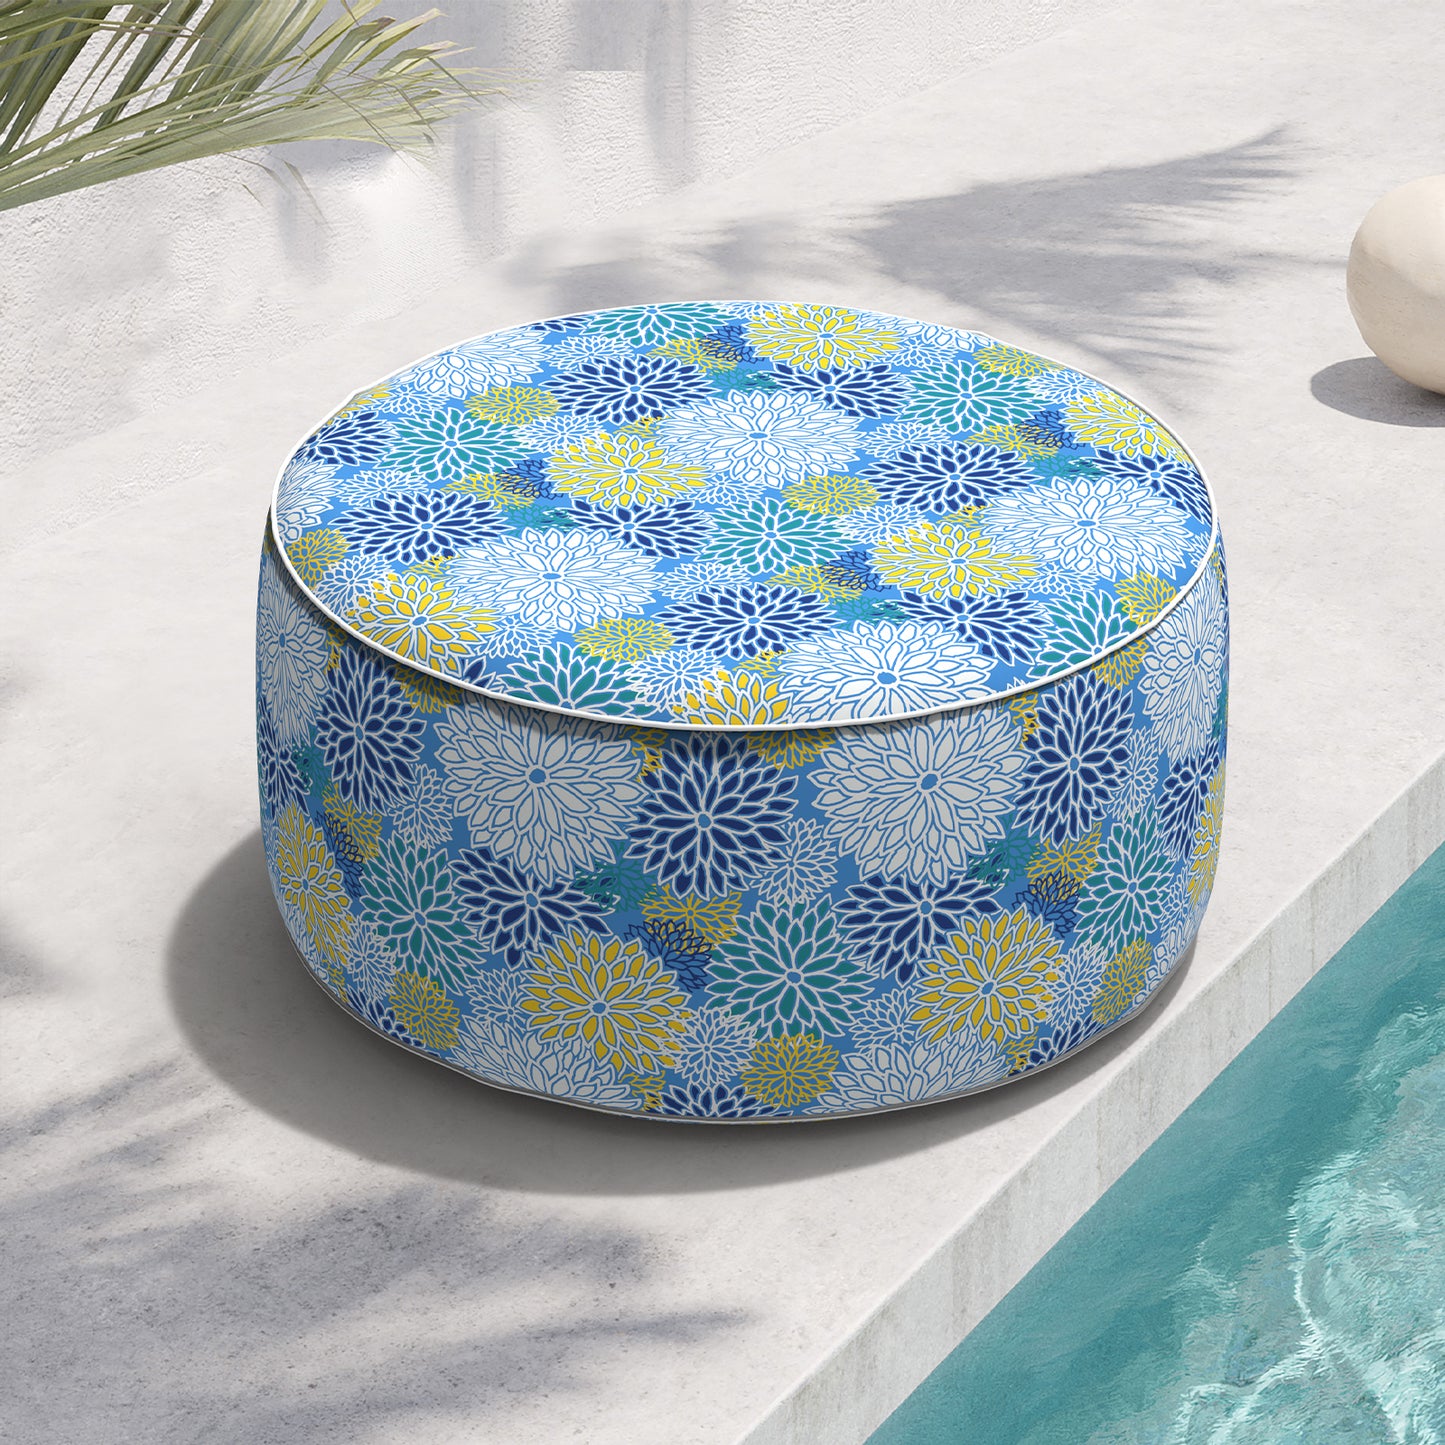 Outdoor Inflatable Stool Ottoman, All Weather Portable Footrest Stool, Furniture Stool Ottomans for Home Garden Beach, D31”xH14”, Dahlia Blue